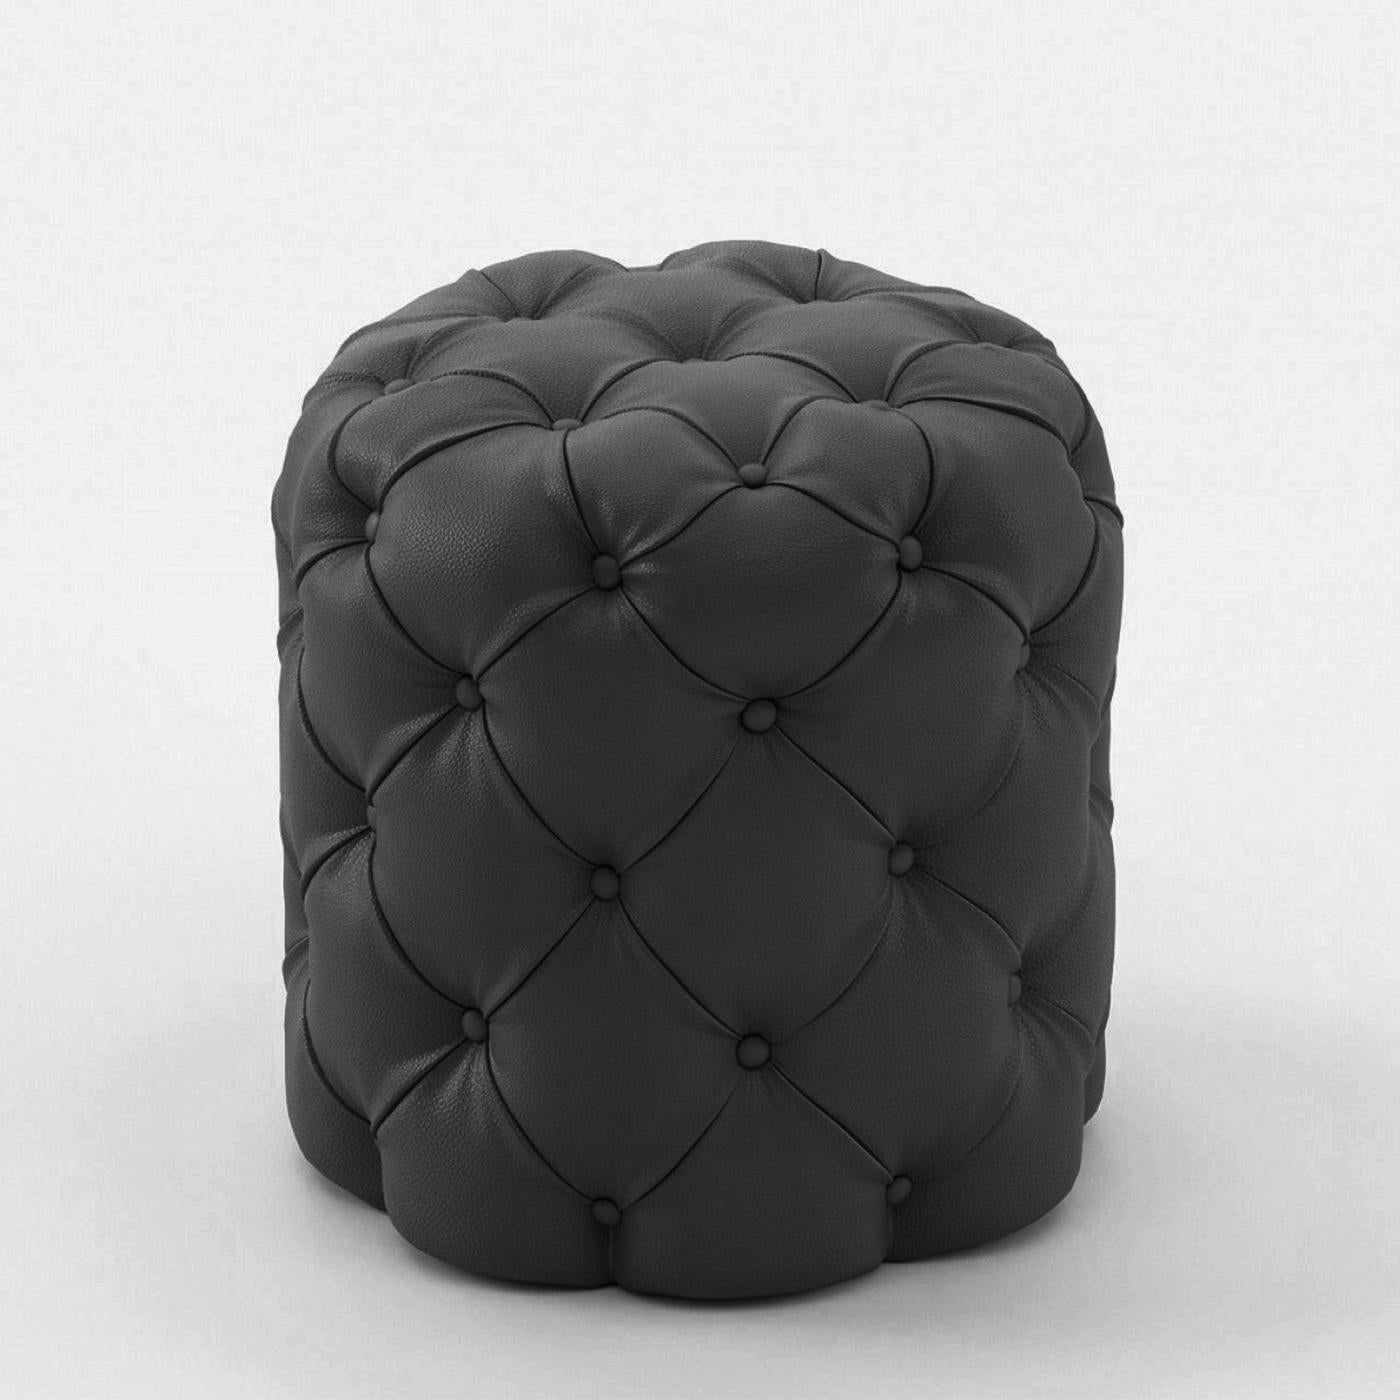 Pouf British Black Leather with wooden structure,
upholstered and covered with black leather capitonated
with button. Also available in other leather colors, on request.